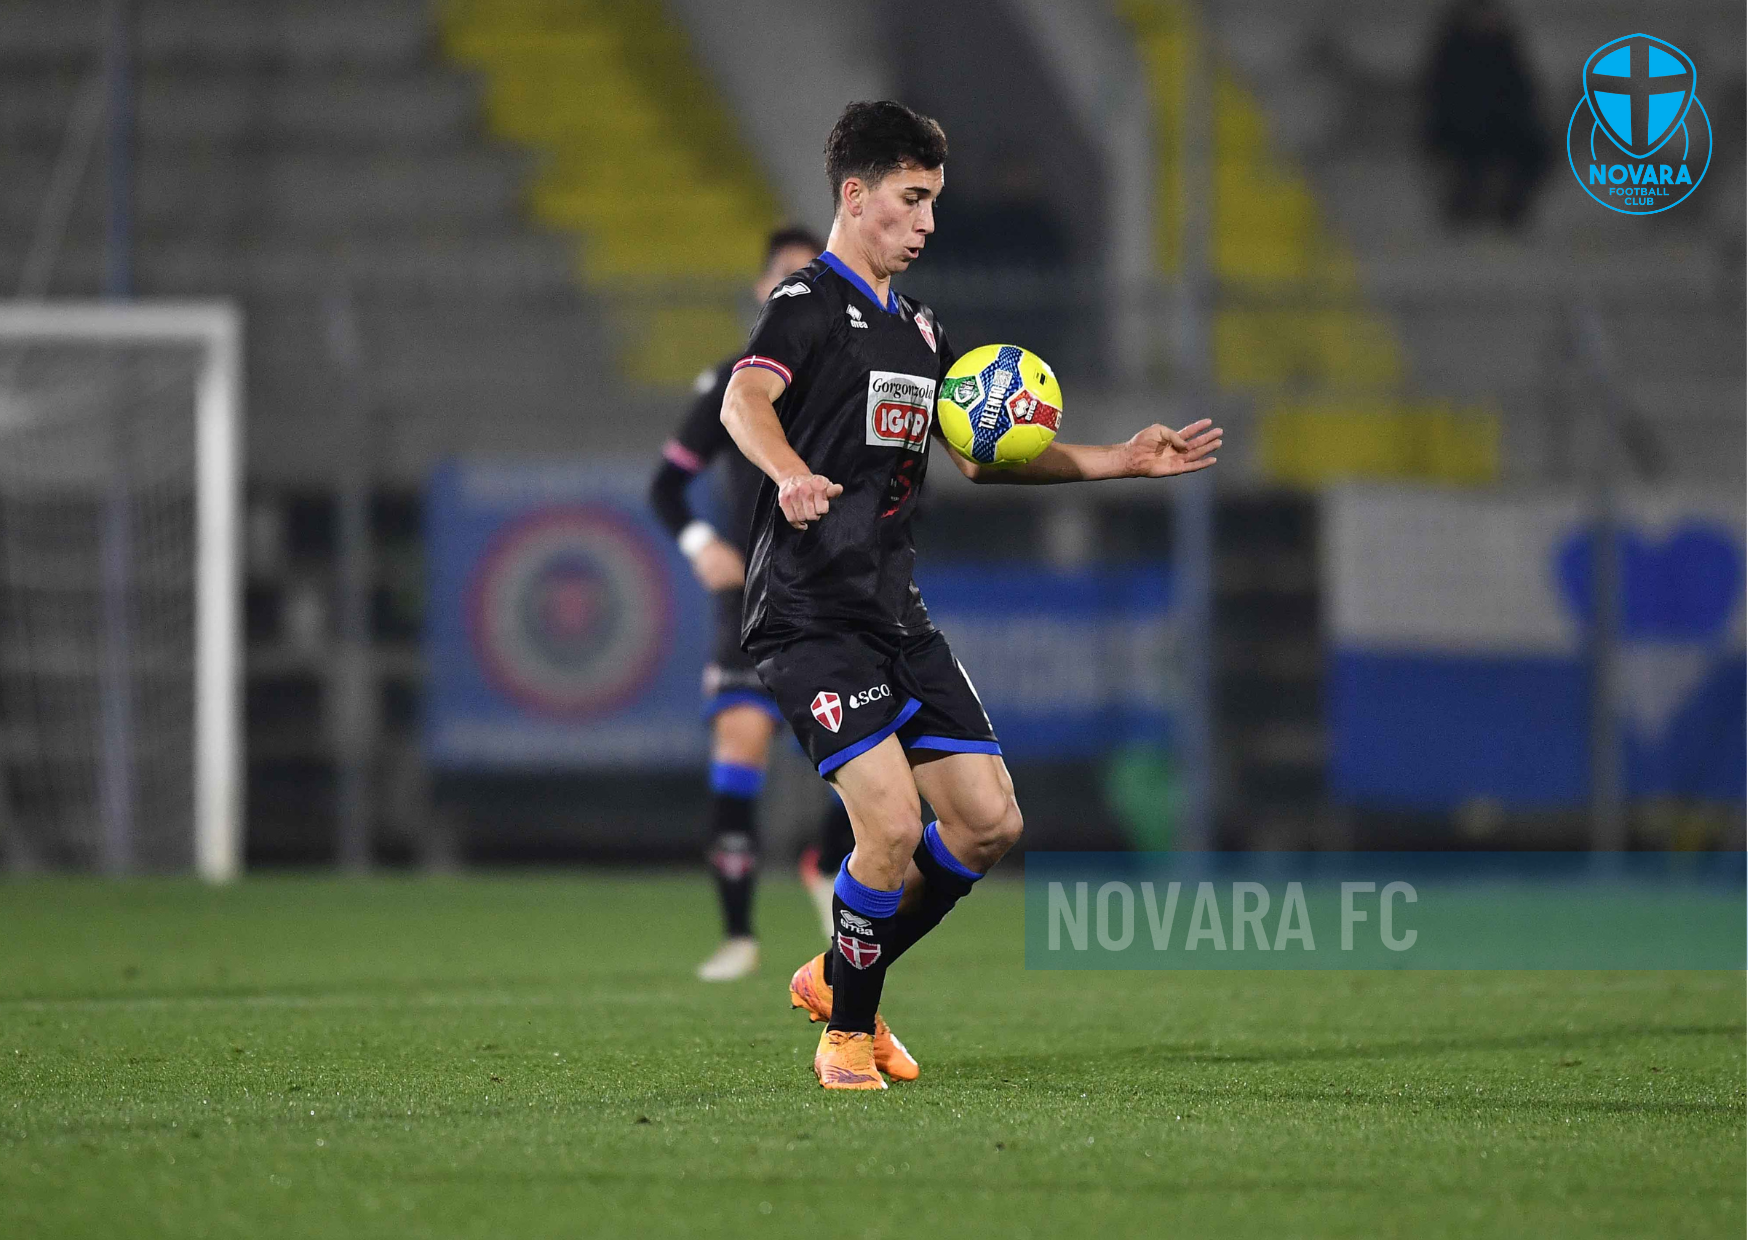 Read more about the article Pergolettese-Novara 1-0 | Gallery